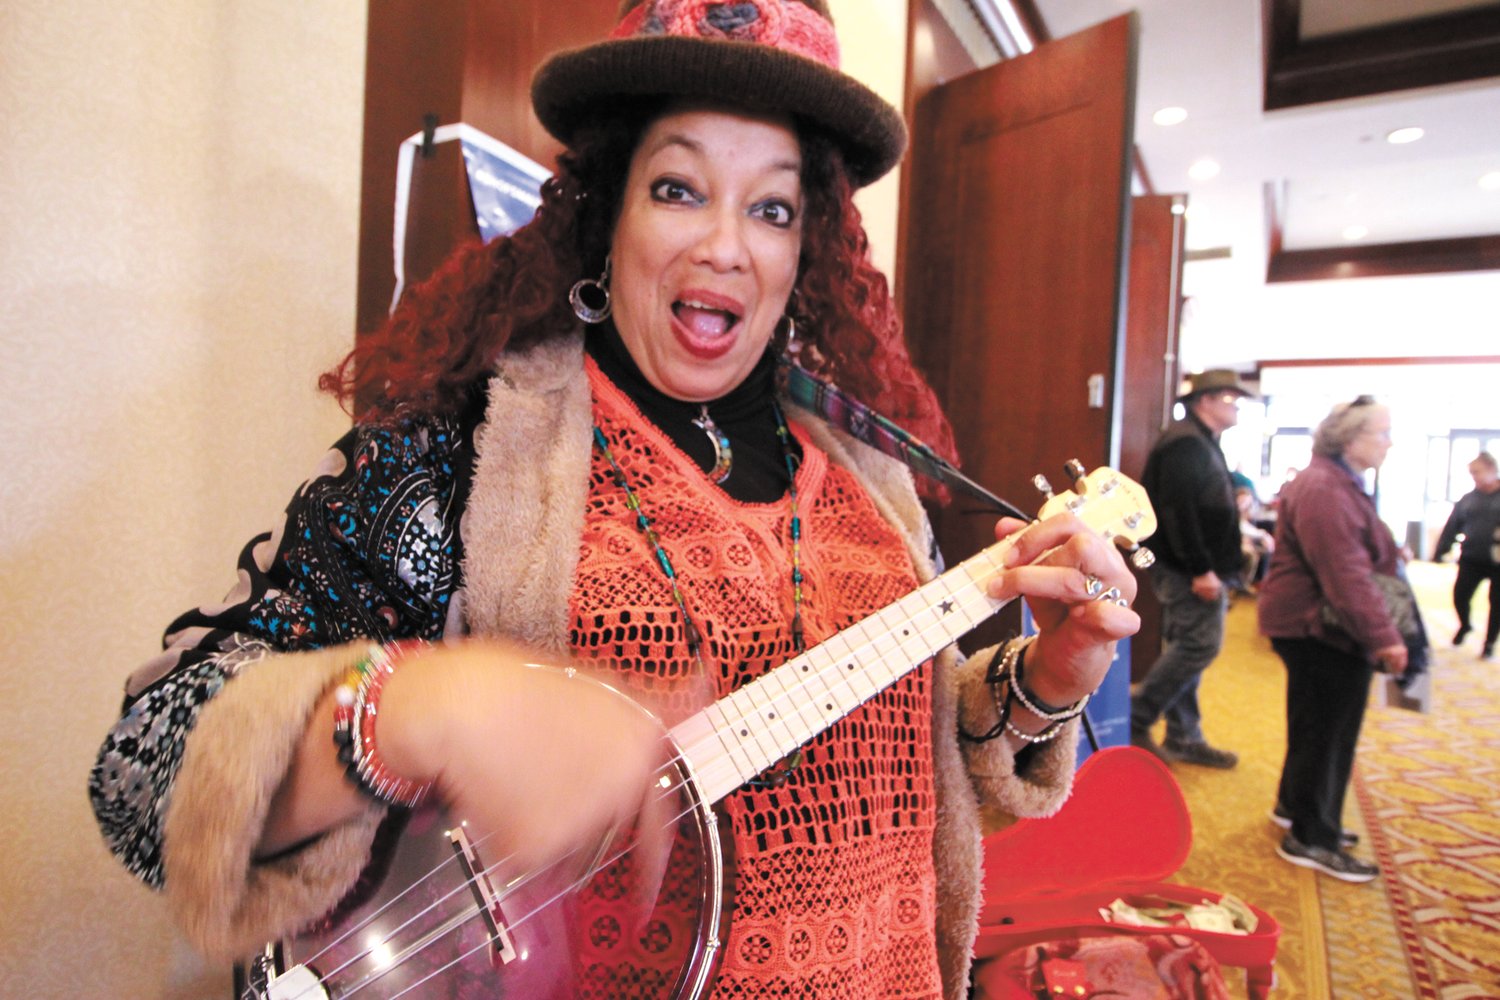 SHARING A TUNE: Doli Grace of Warren brought along her ukulele and her colorful outfit to brighten the day for those attending Small Business Saturday. She said more than the dollars dropped in her instrument case she valued the kids who danced to her music and in particular the boy who pulled the lollipop from his mouth to give it to her. “Just think what that meant to him,” she said.